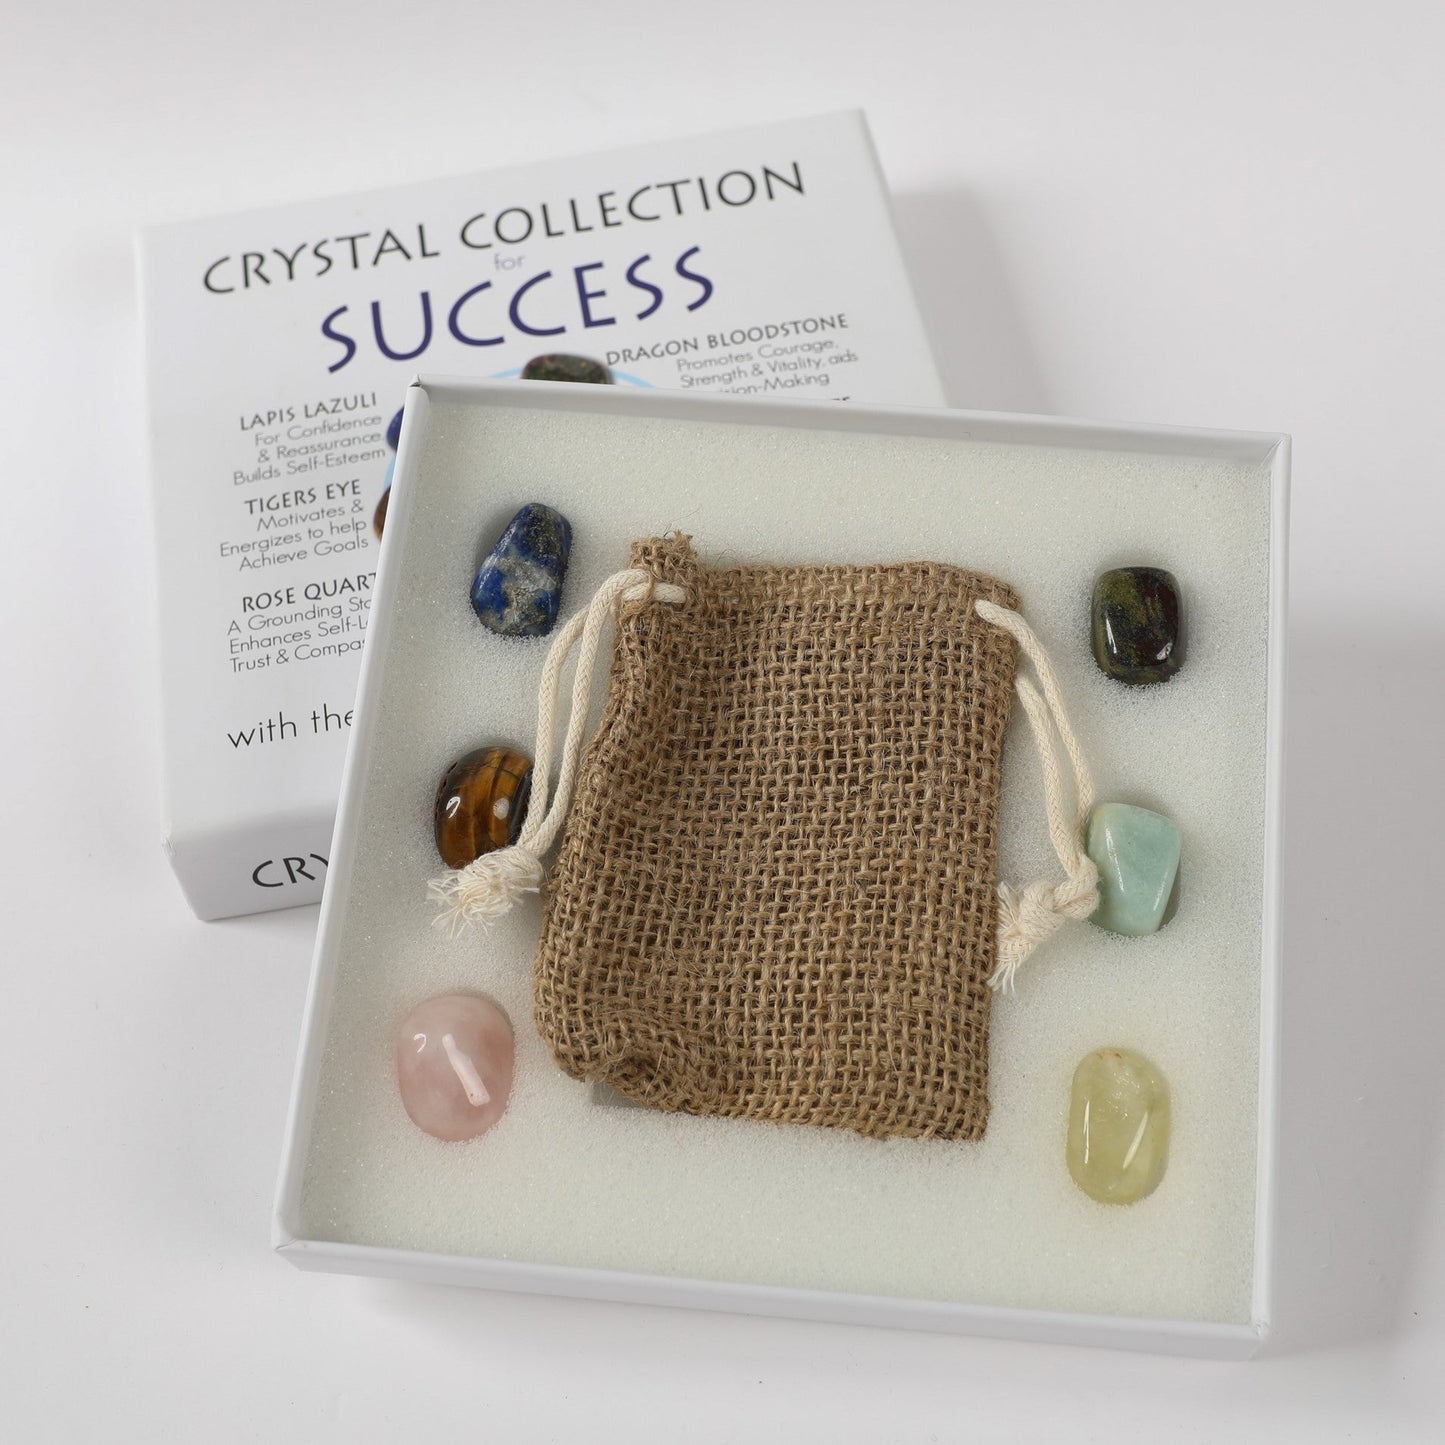 Crystal Collection Set - Immune System